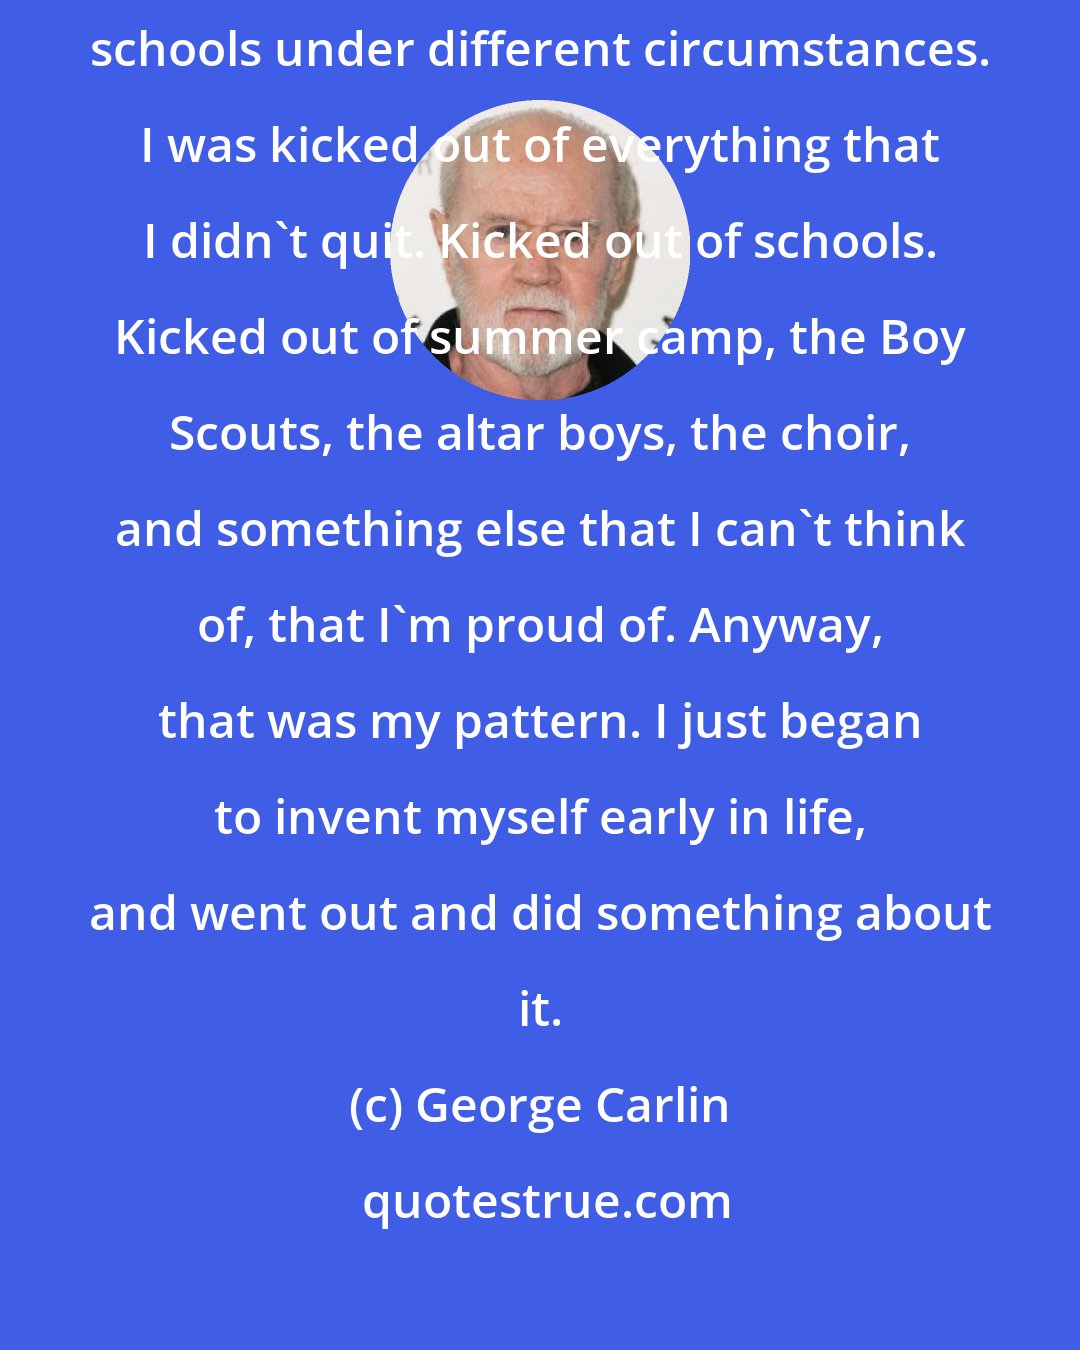 George Carlin: I had run away from home three times. I had been kicked out of three different schools under different circumstances. I was kicked out of everything that I didn't quit. Kicked out of schools. Kicked out of summer camp, the Boy Scouts, the altar boys, the choir, and something else that I can't think of, that I'm proud of. Anyway, that was my pattern. I just began to invent myself early in life, and went out and did something about it.